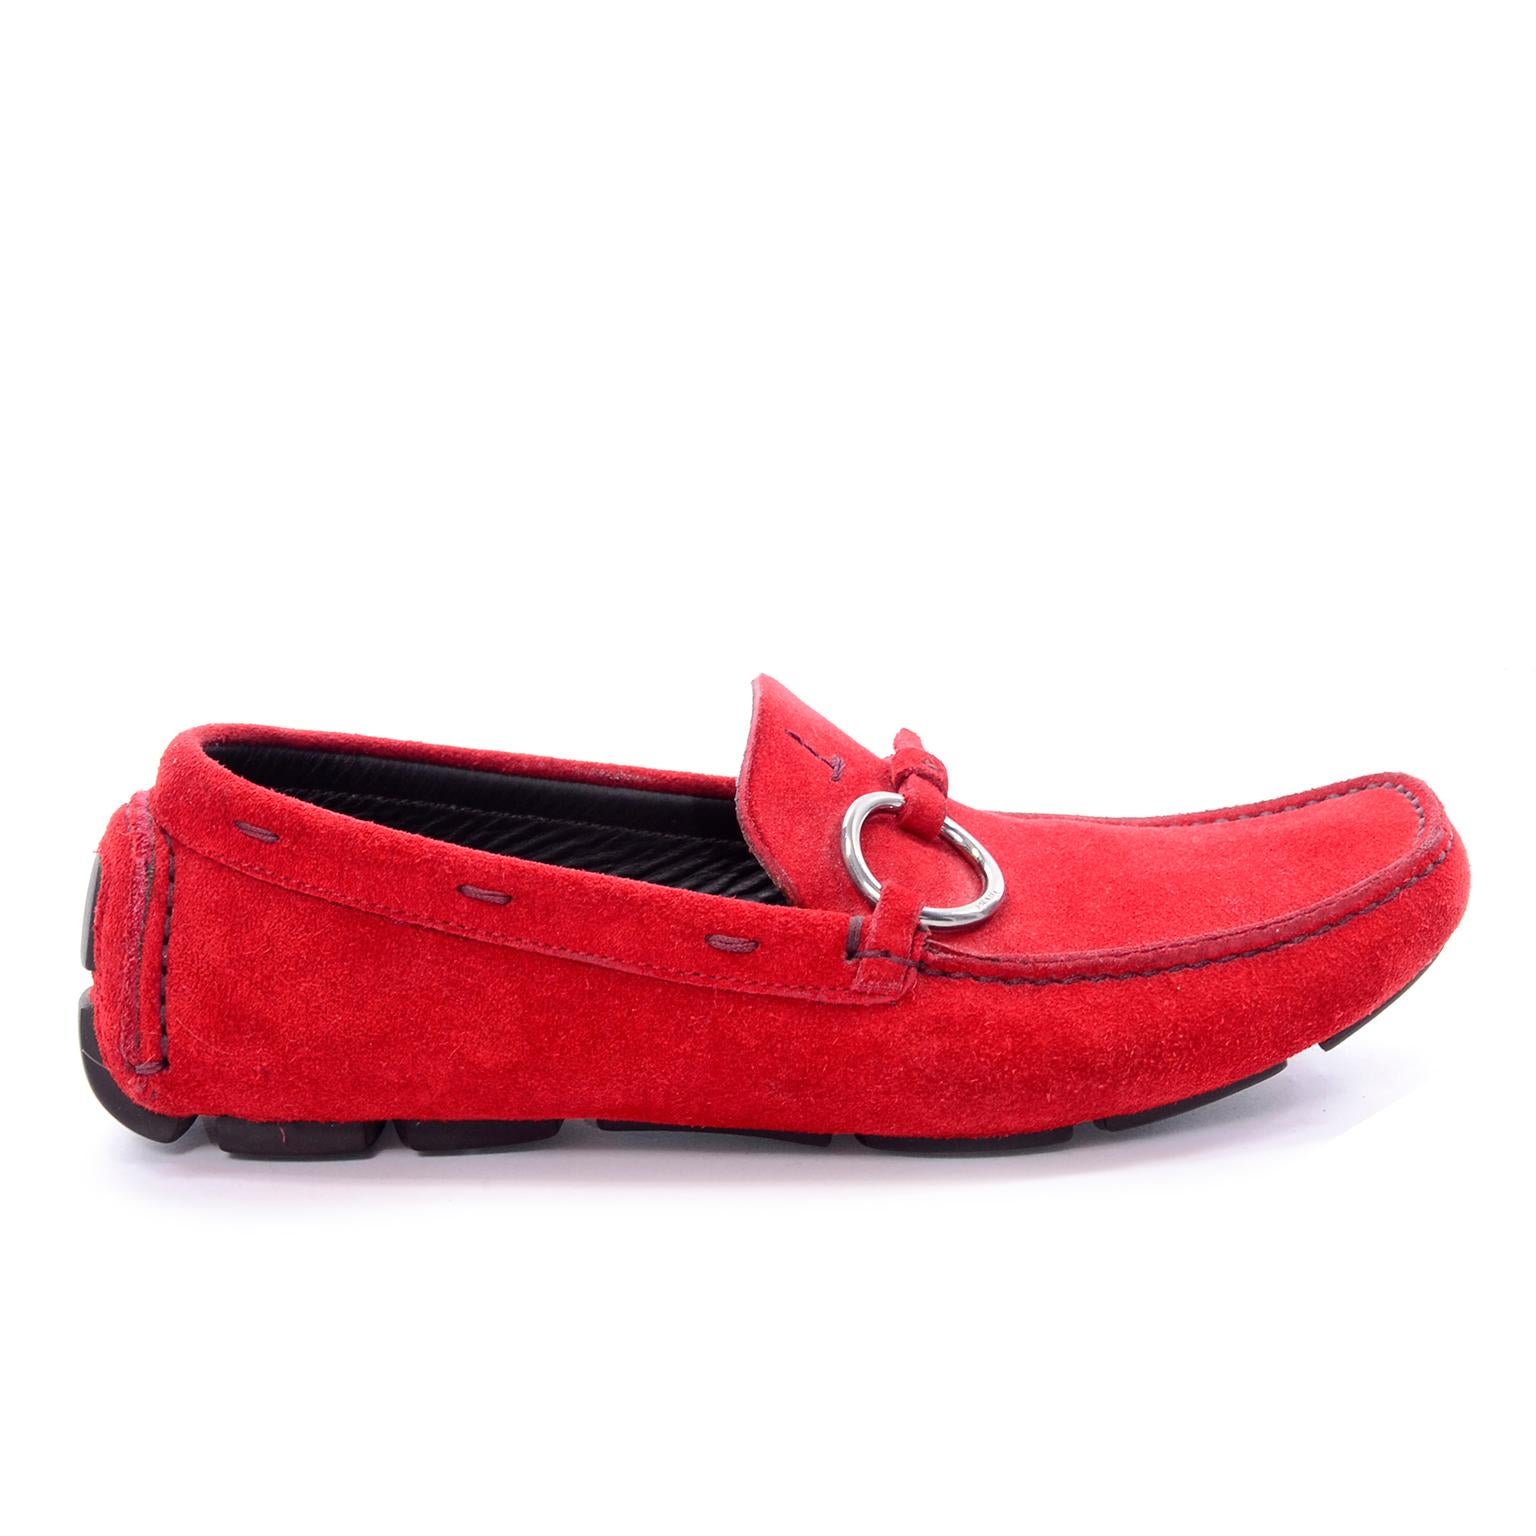 Unworn New Prada Red Suede Shoes Loafers Size 37.5 With Silver Ring Buckle 5